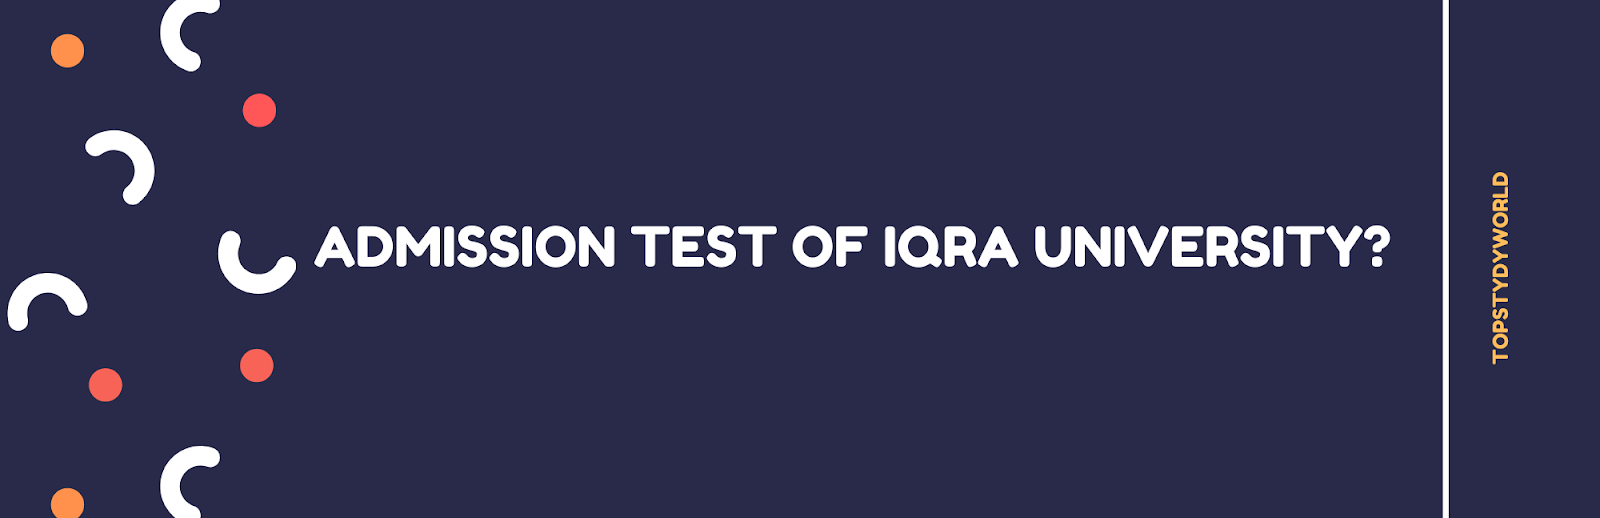 how-to-get-admission-in-iqra-university-step-by-step-guide-top-study-world